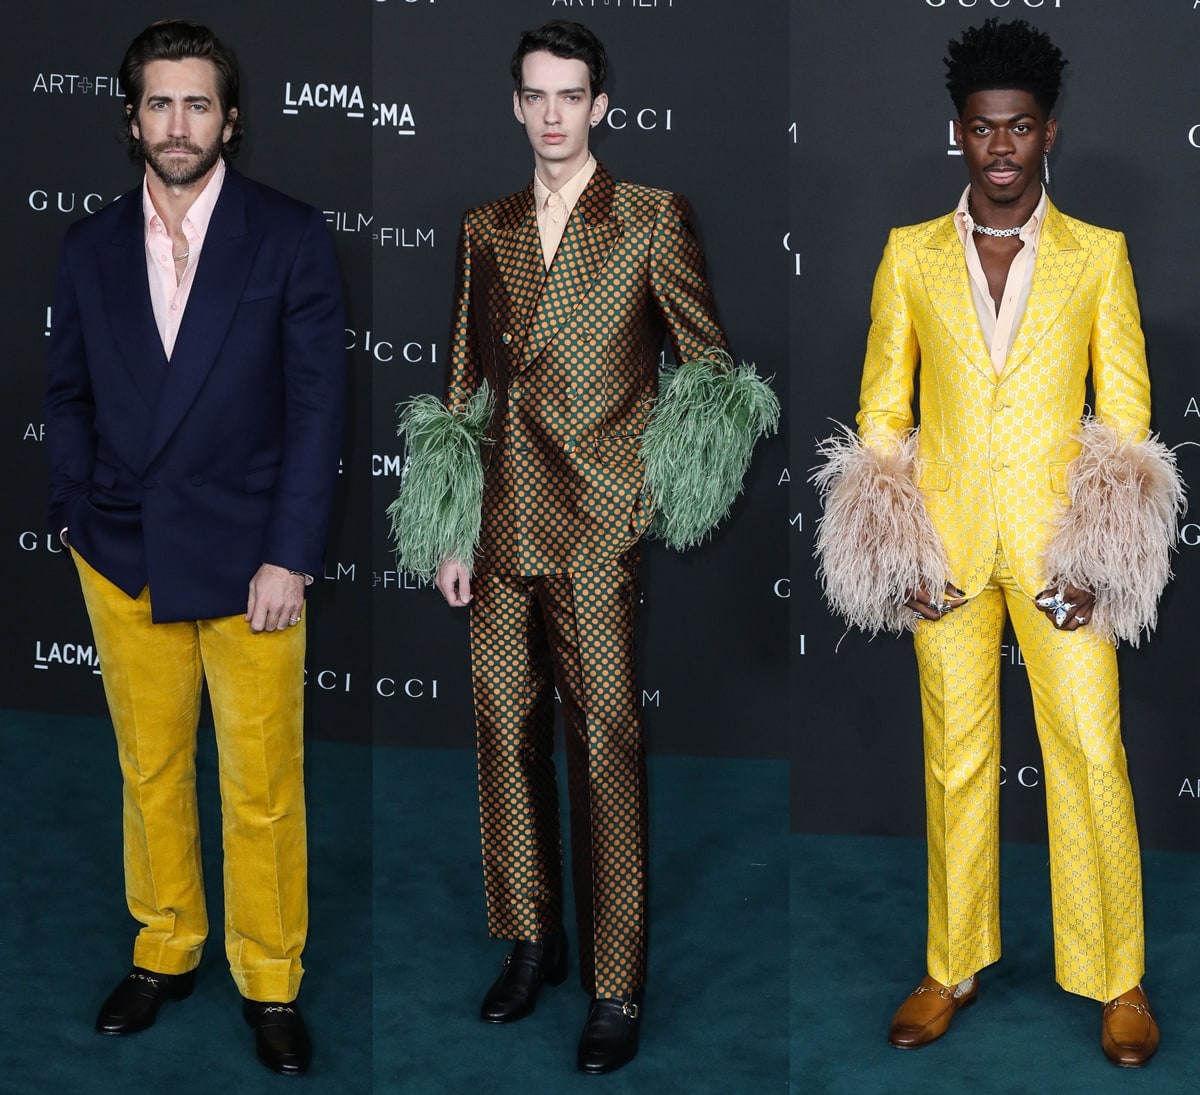 Jake Gyllenhaal, Kodi Smit-McPhee, and Lil Nas X in loafers and Gucci suits